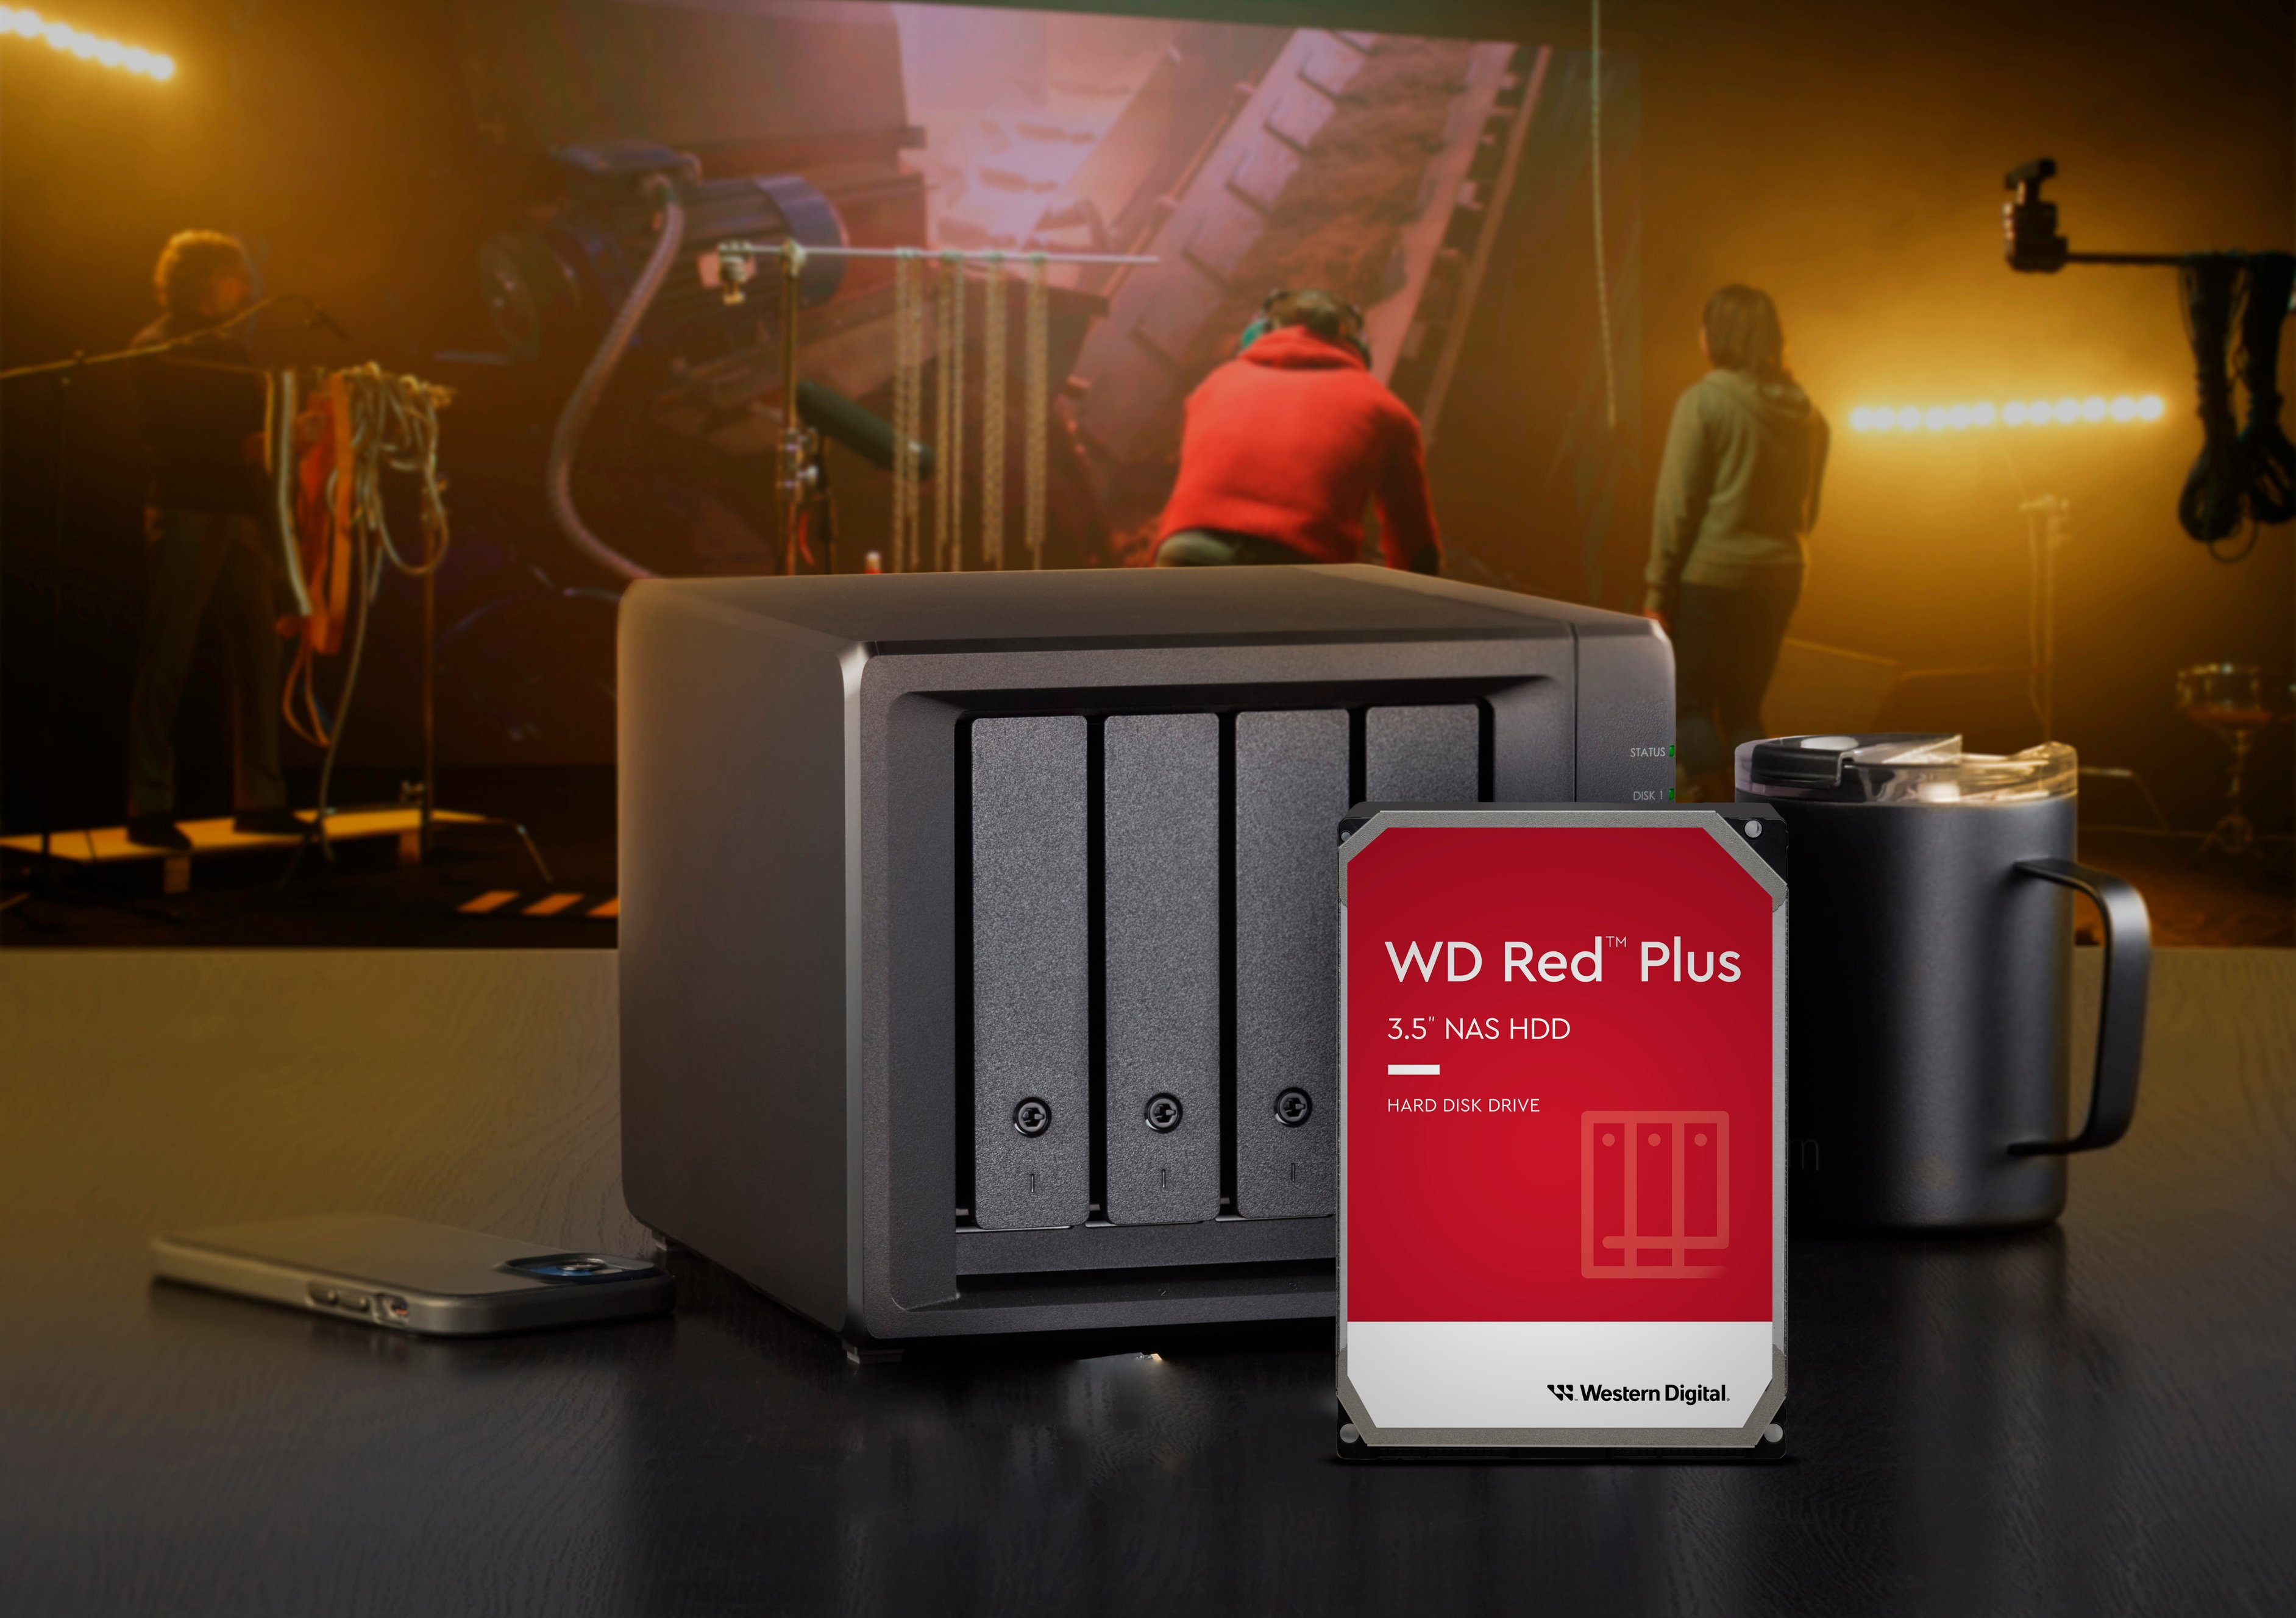 WD Red Plus 6TB NAS Hard Disk Drive - 5400 RPM Class SATA 6Gb/s, CMR, 64MB  Cache, 3.5 Inch - WD60EFRX